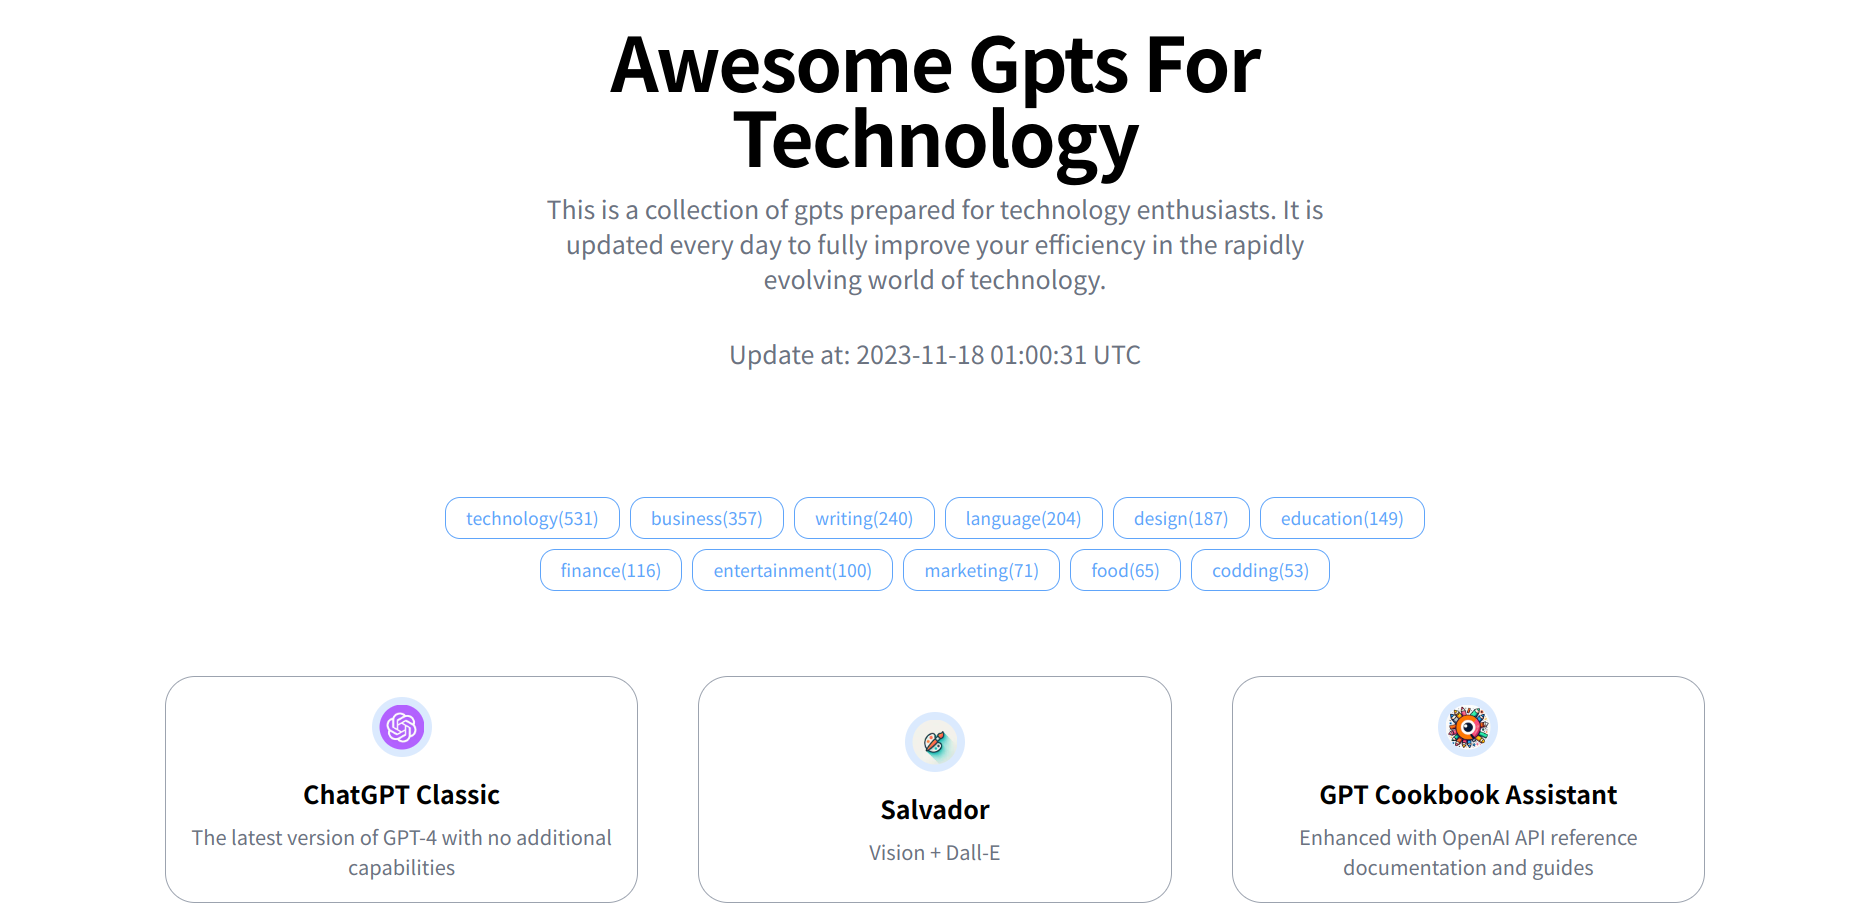 Awesome Gpts of technology logo